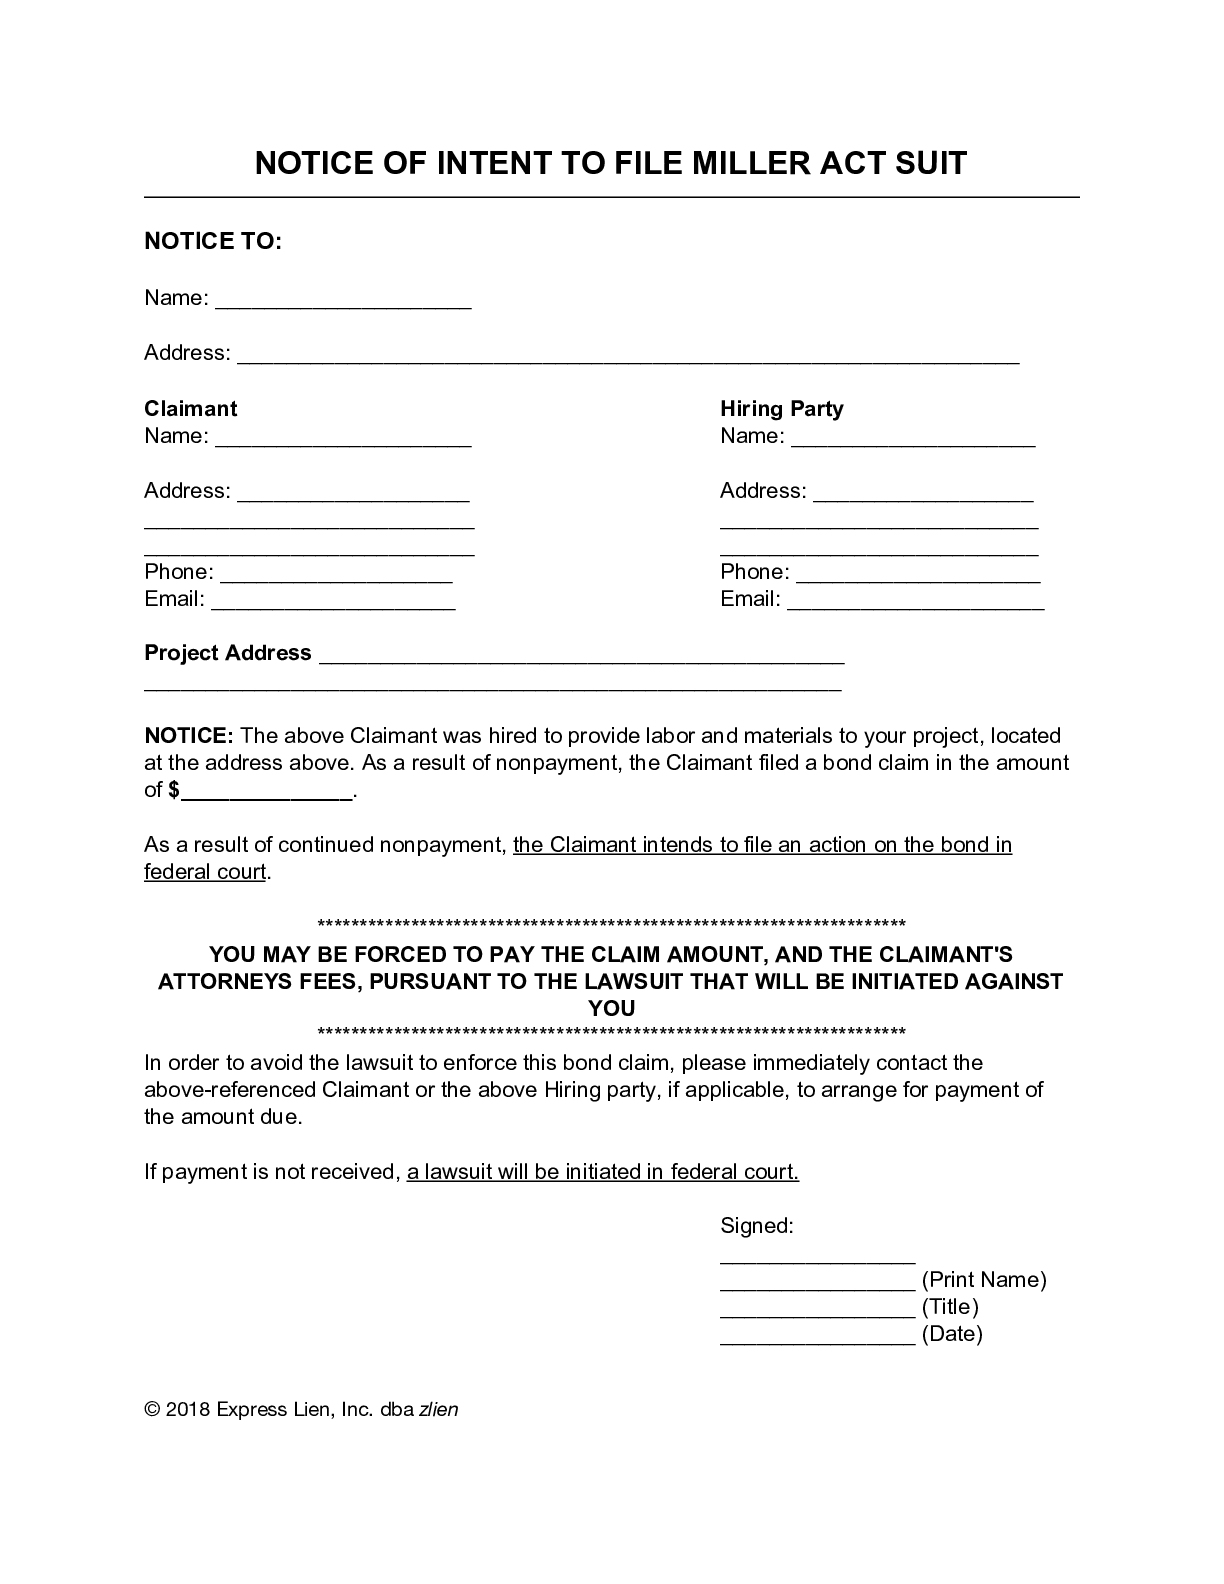 Notice of Intent to File Miller Act Suit Form - free from